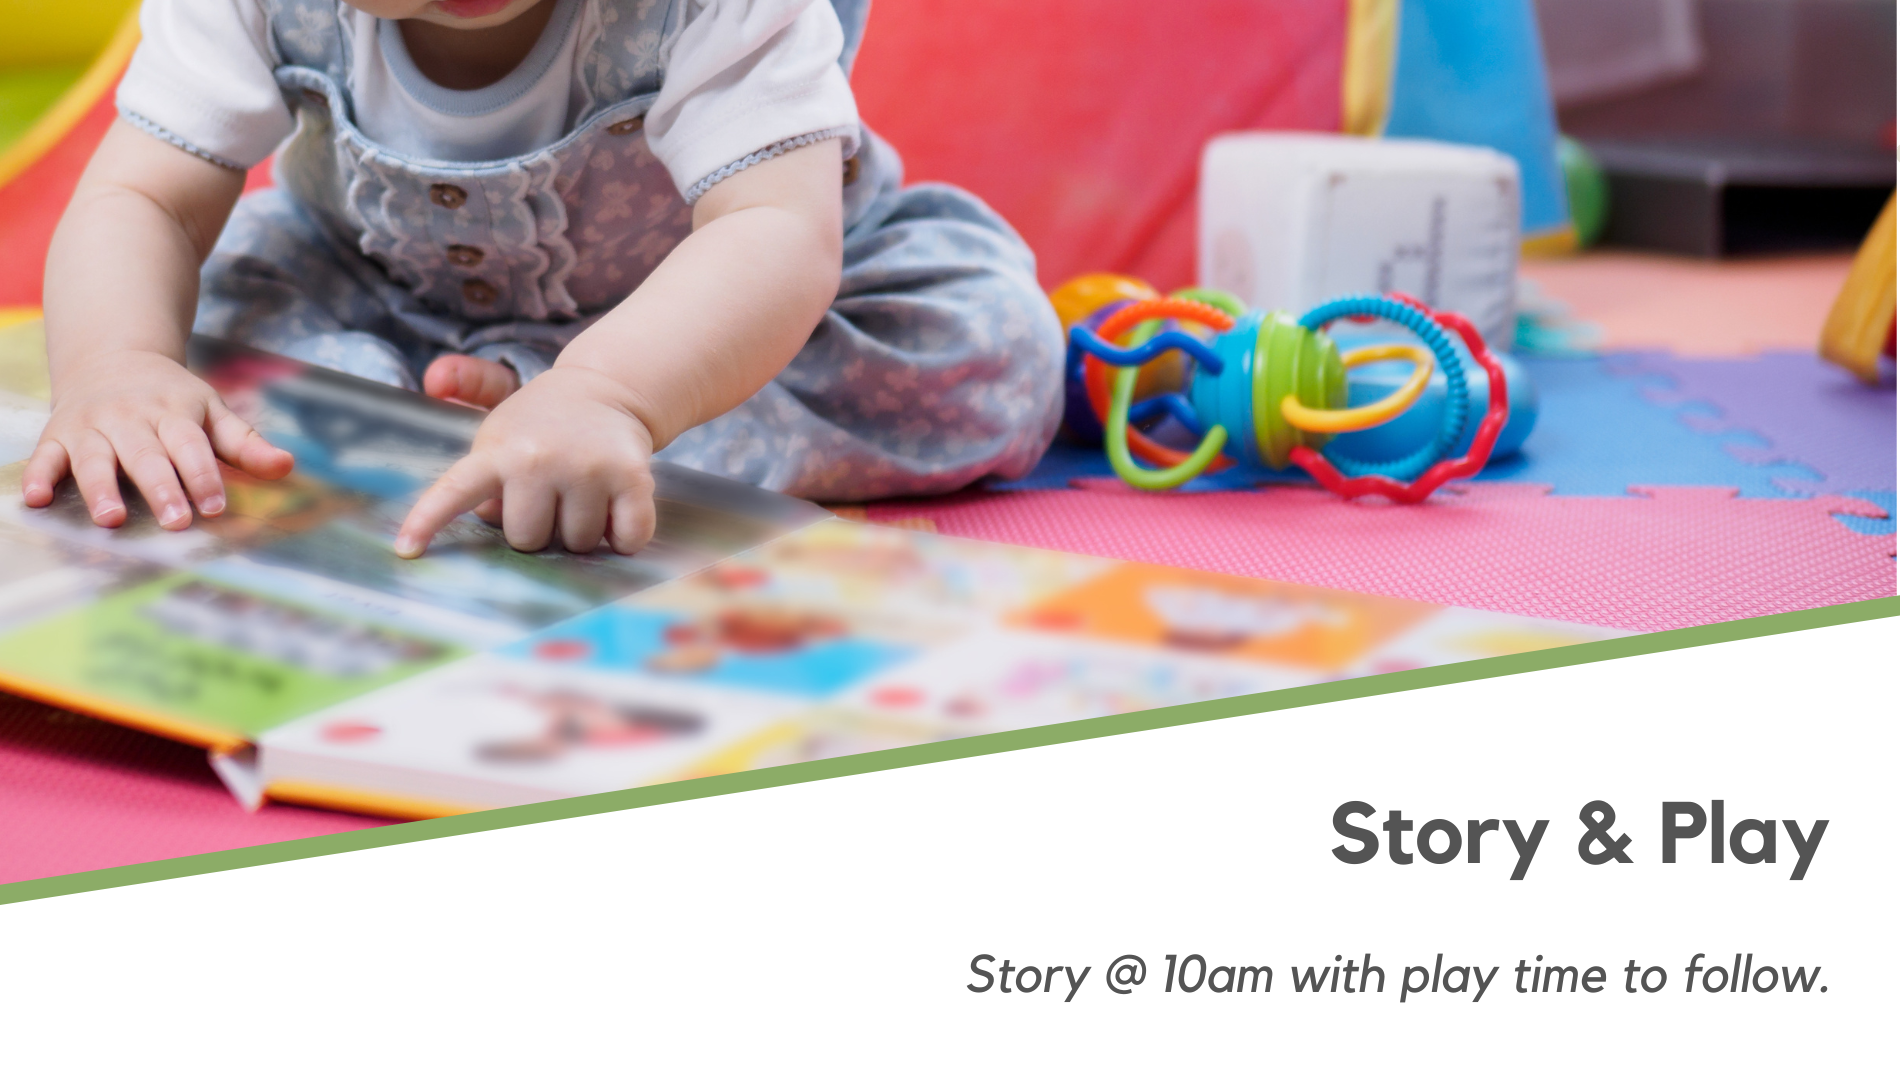 Story & Play Time